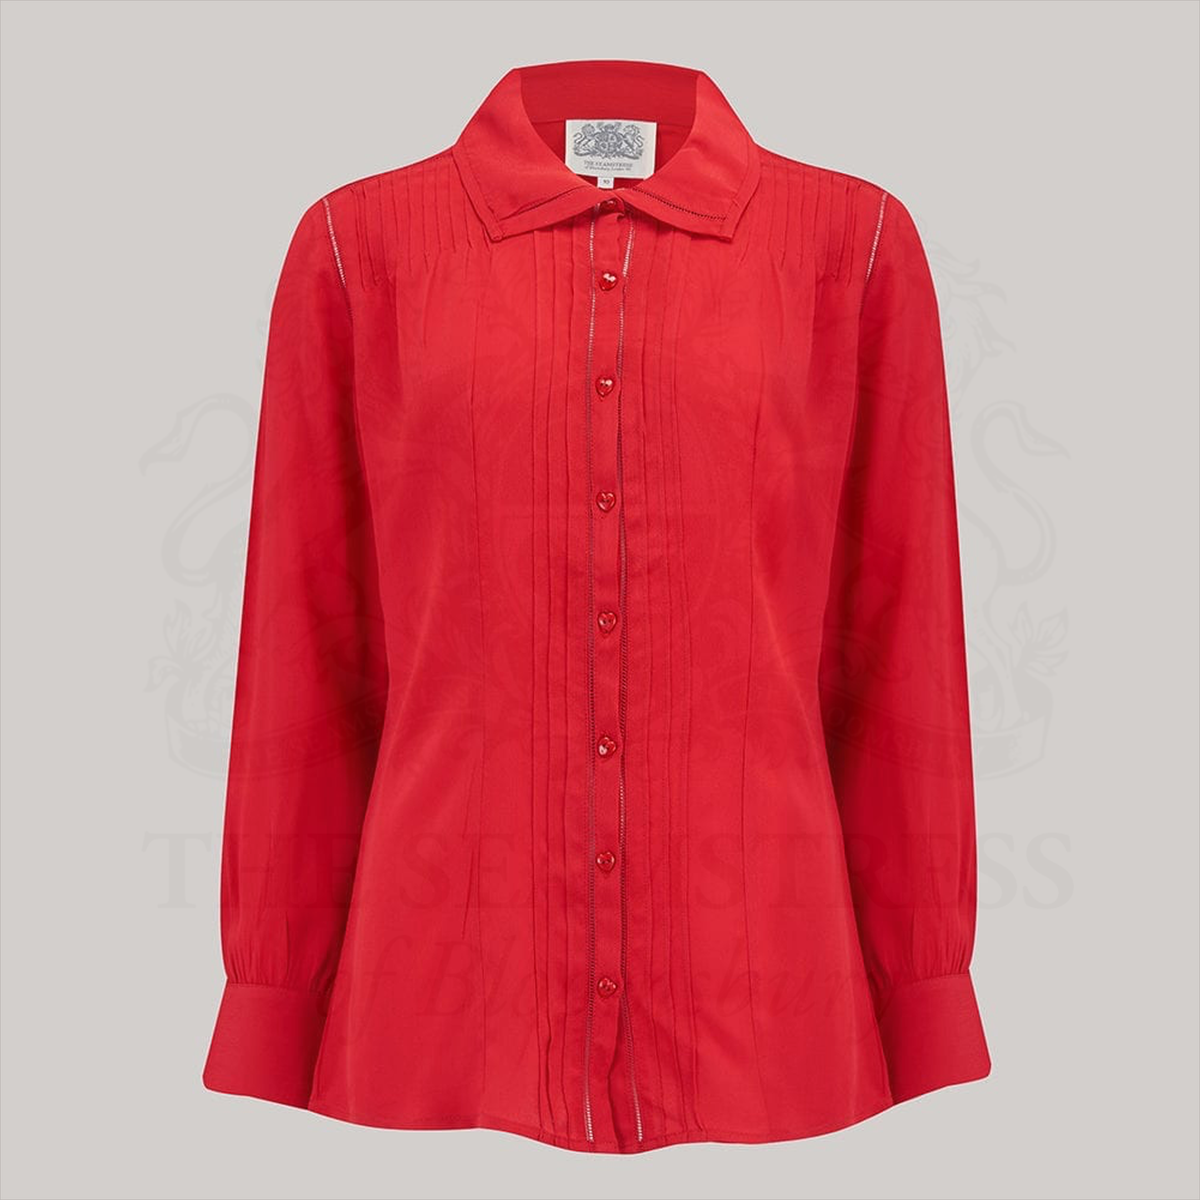 A 1940s style red long sleeve blouse. Detailed pin tuck stitching down the front and back of the blouse, heart shaped buttons, and long sleeves with deep cuffs. Blouse has a cutaway collar with more pin tuck stitching. 